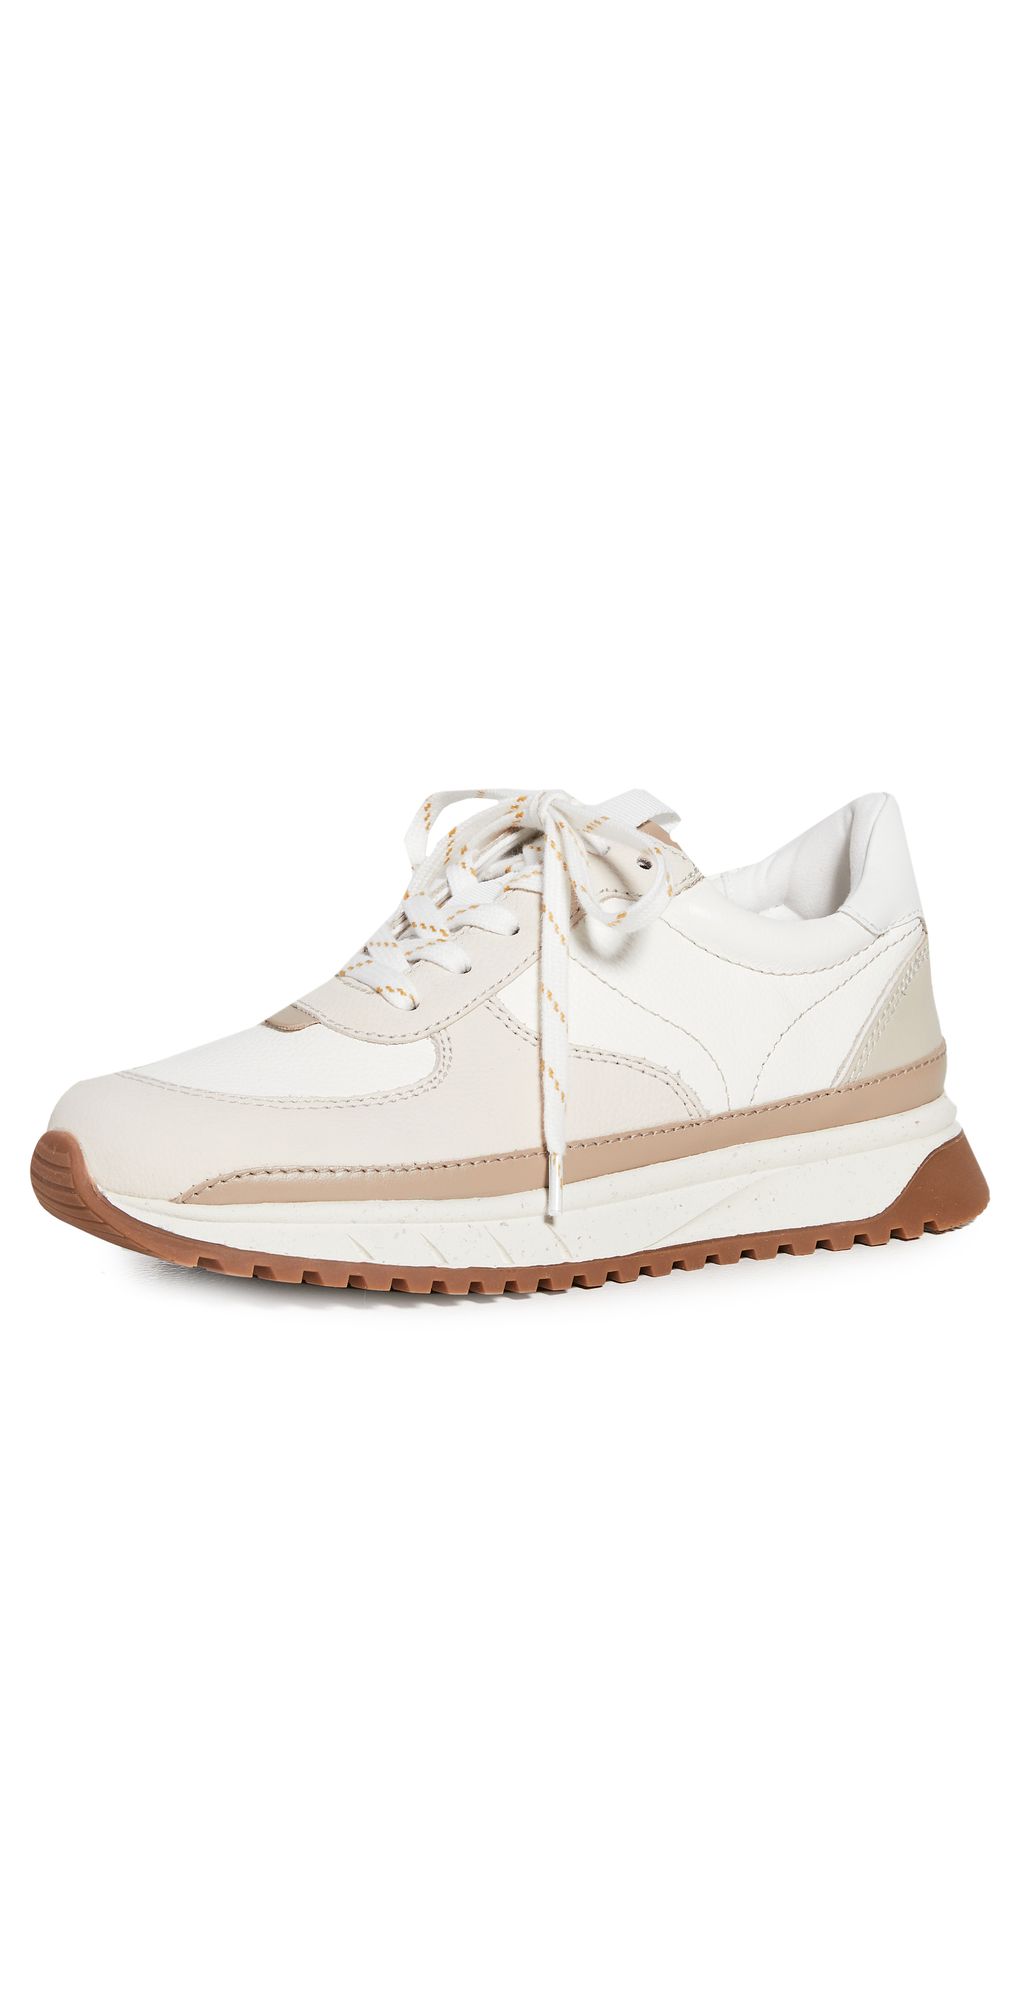 Madewell Kickoff Trainer Sneakers in Neutral Colorblock Leather | SHOPBOP | Shopbop